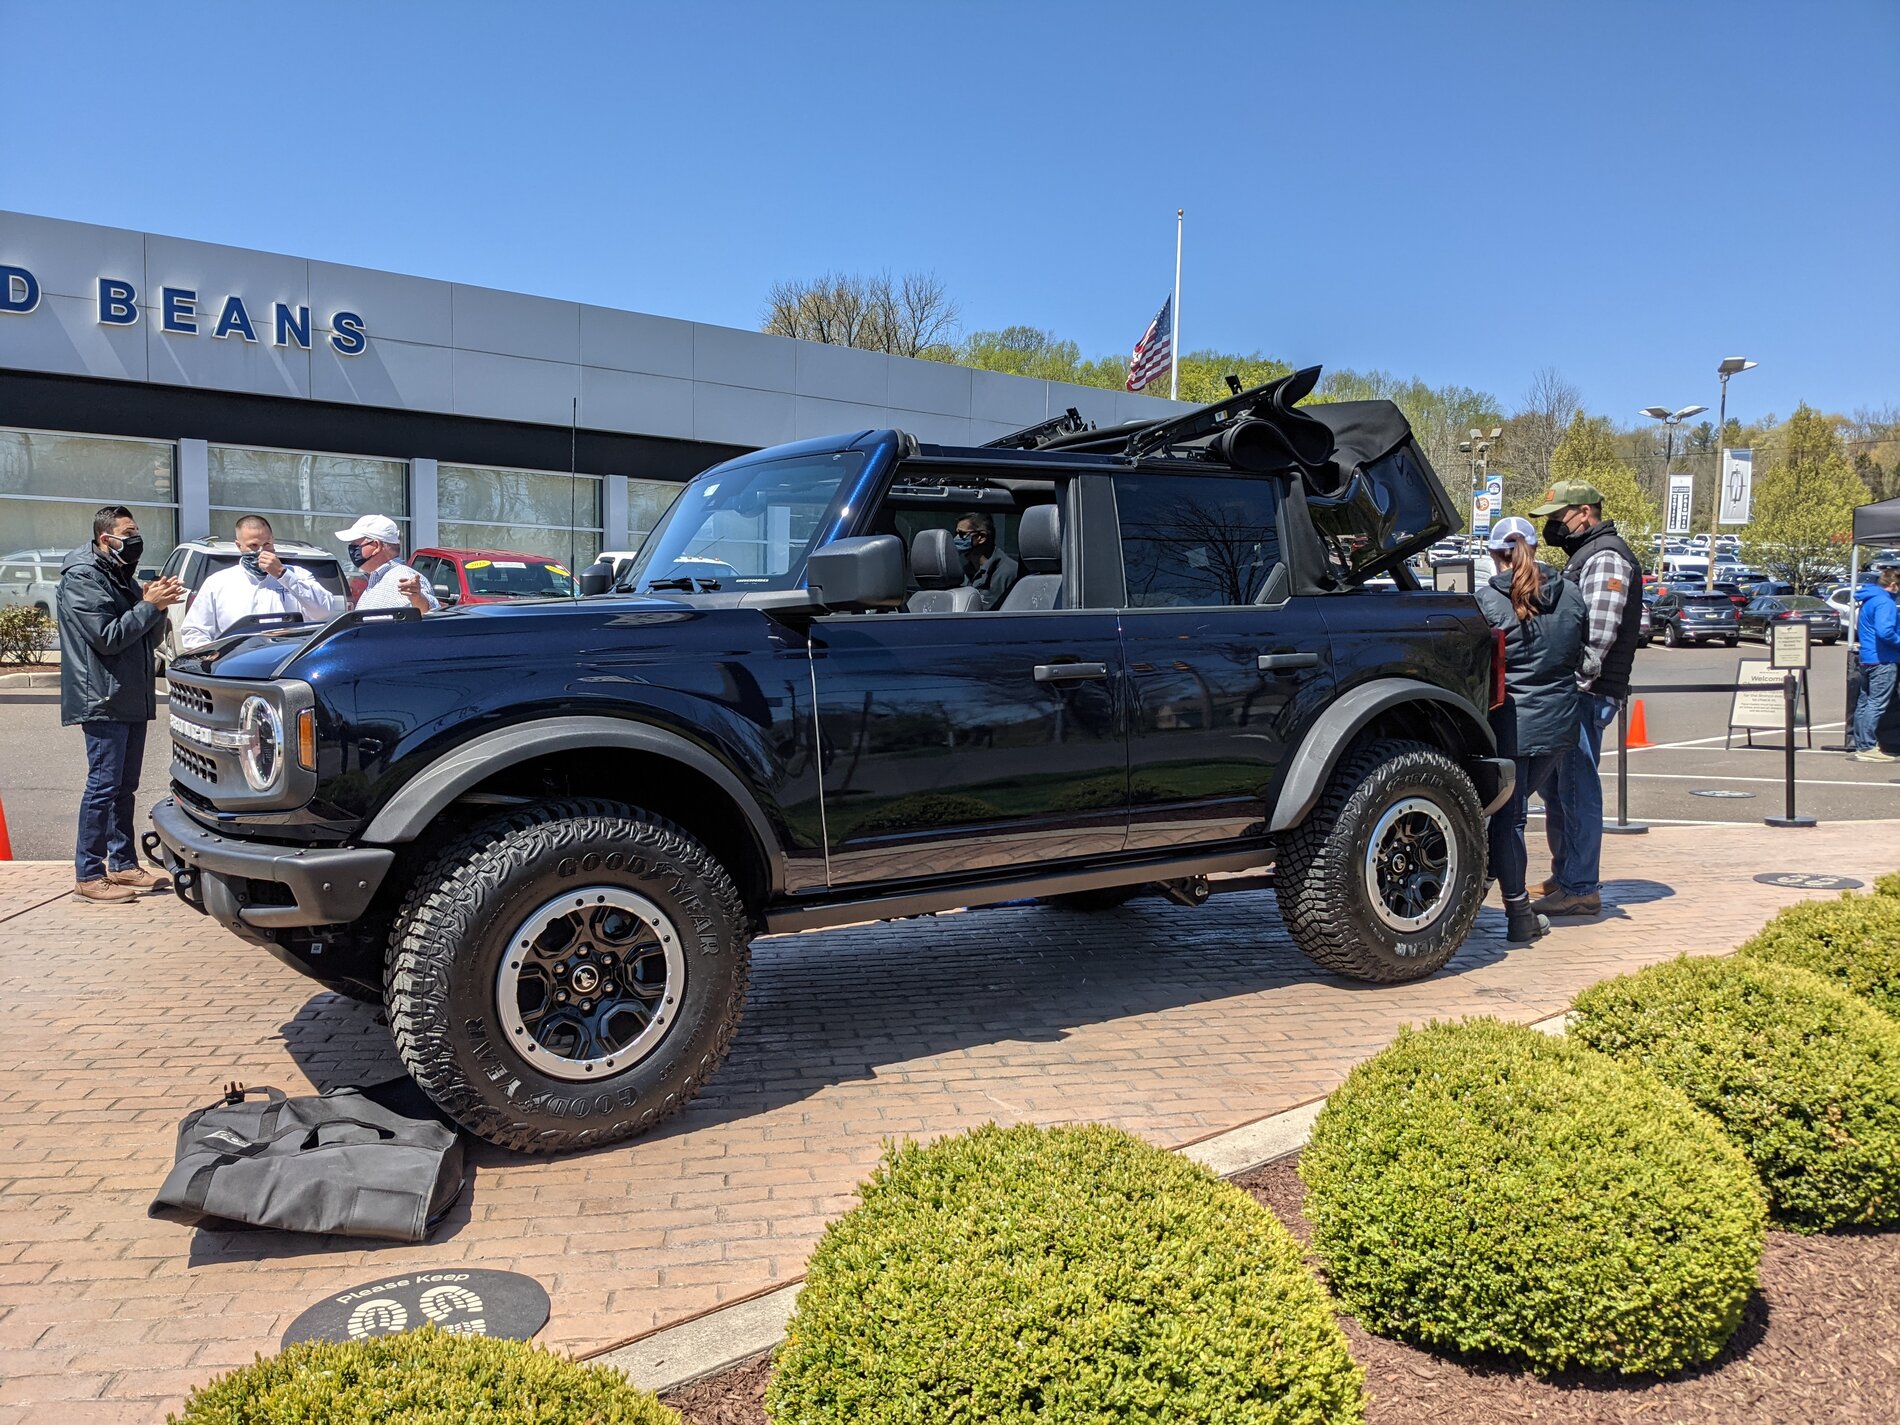 Ford Bronco NJ/NY/Delaware/Eastern Pa./MD/Ct Volume Buyers? PXL_20210426_160627268